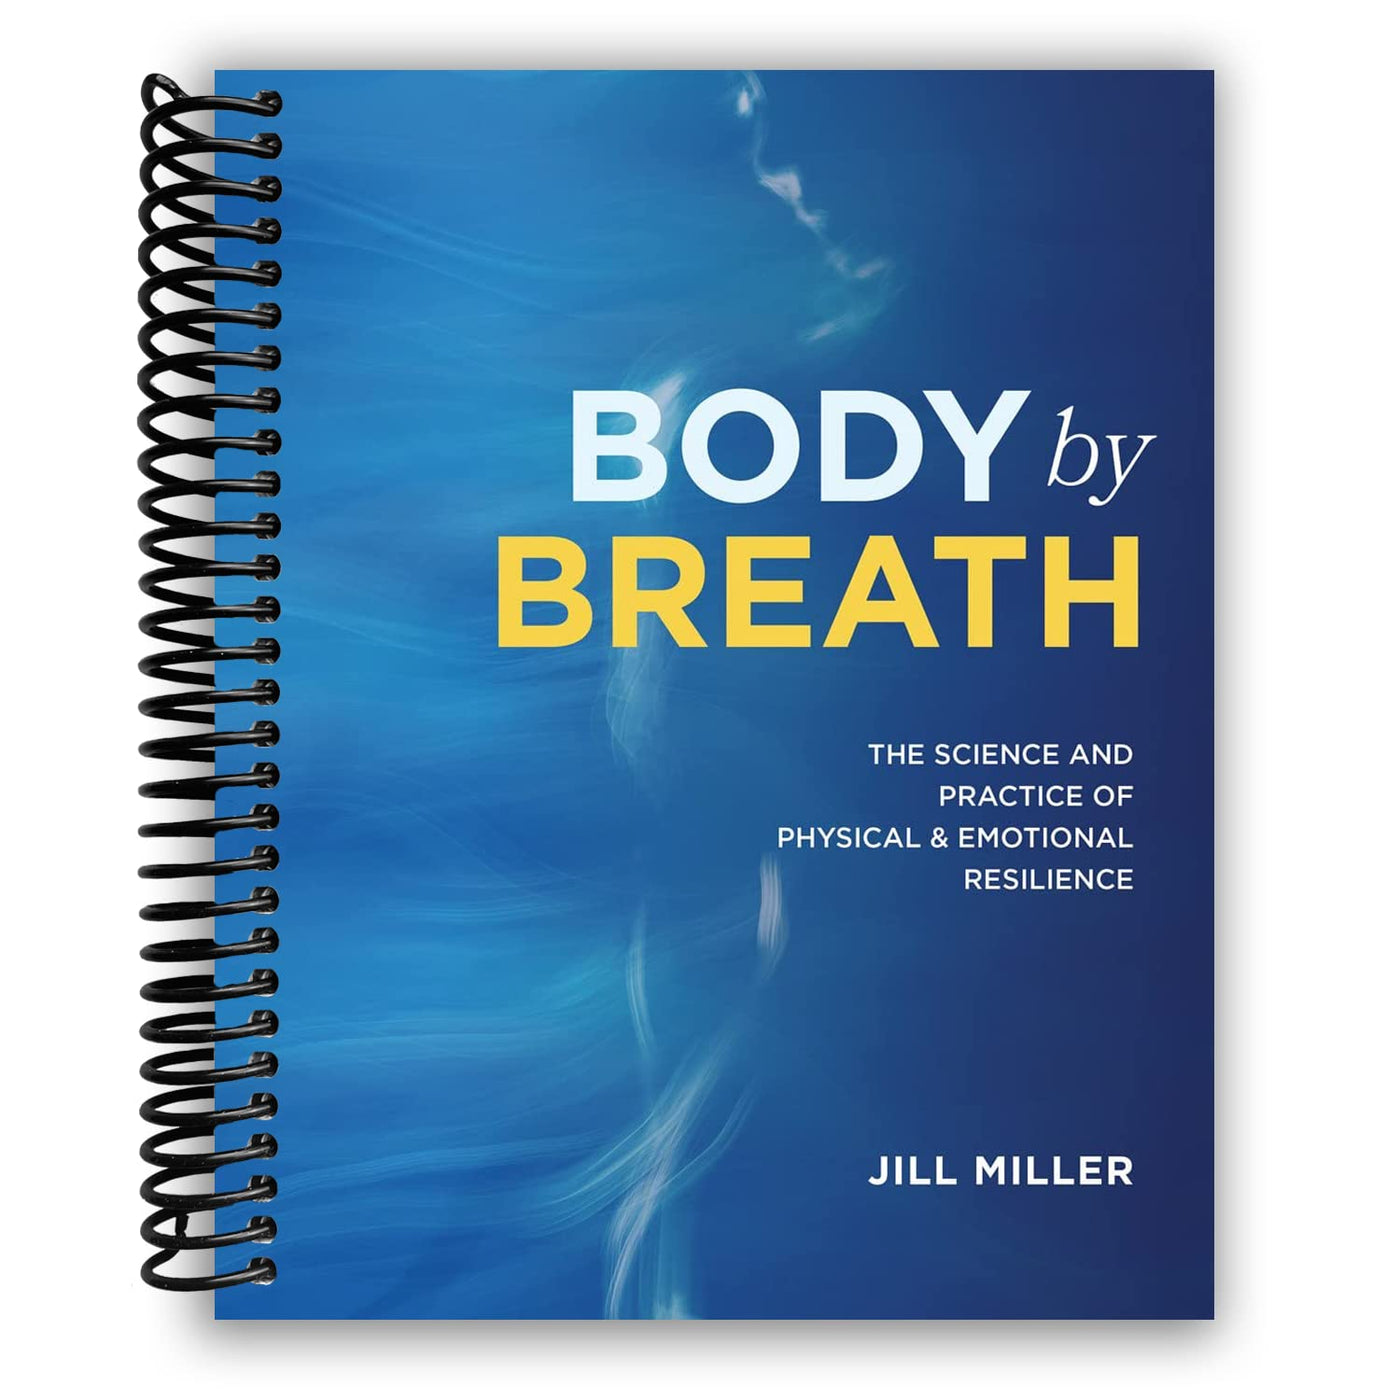 Body by Breath: The Science and Practice of Physical and Emotional Resilience (Spiral Bound)